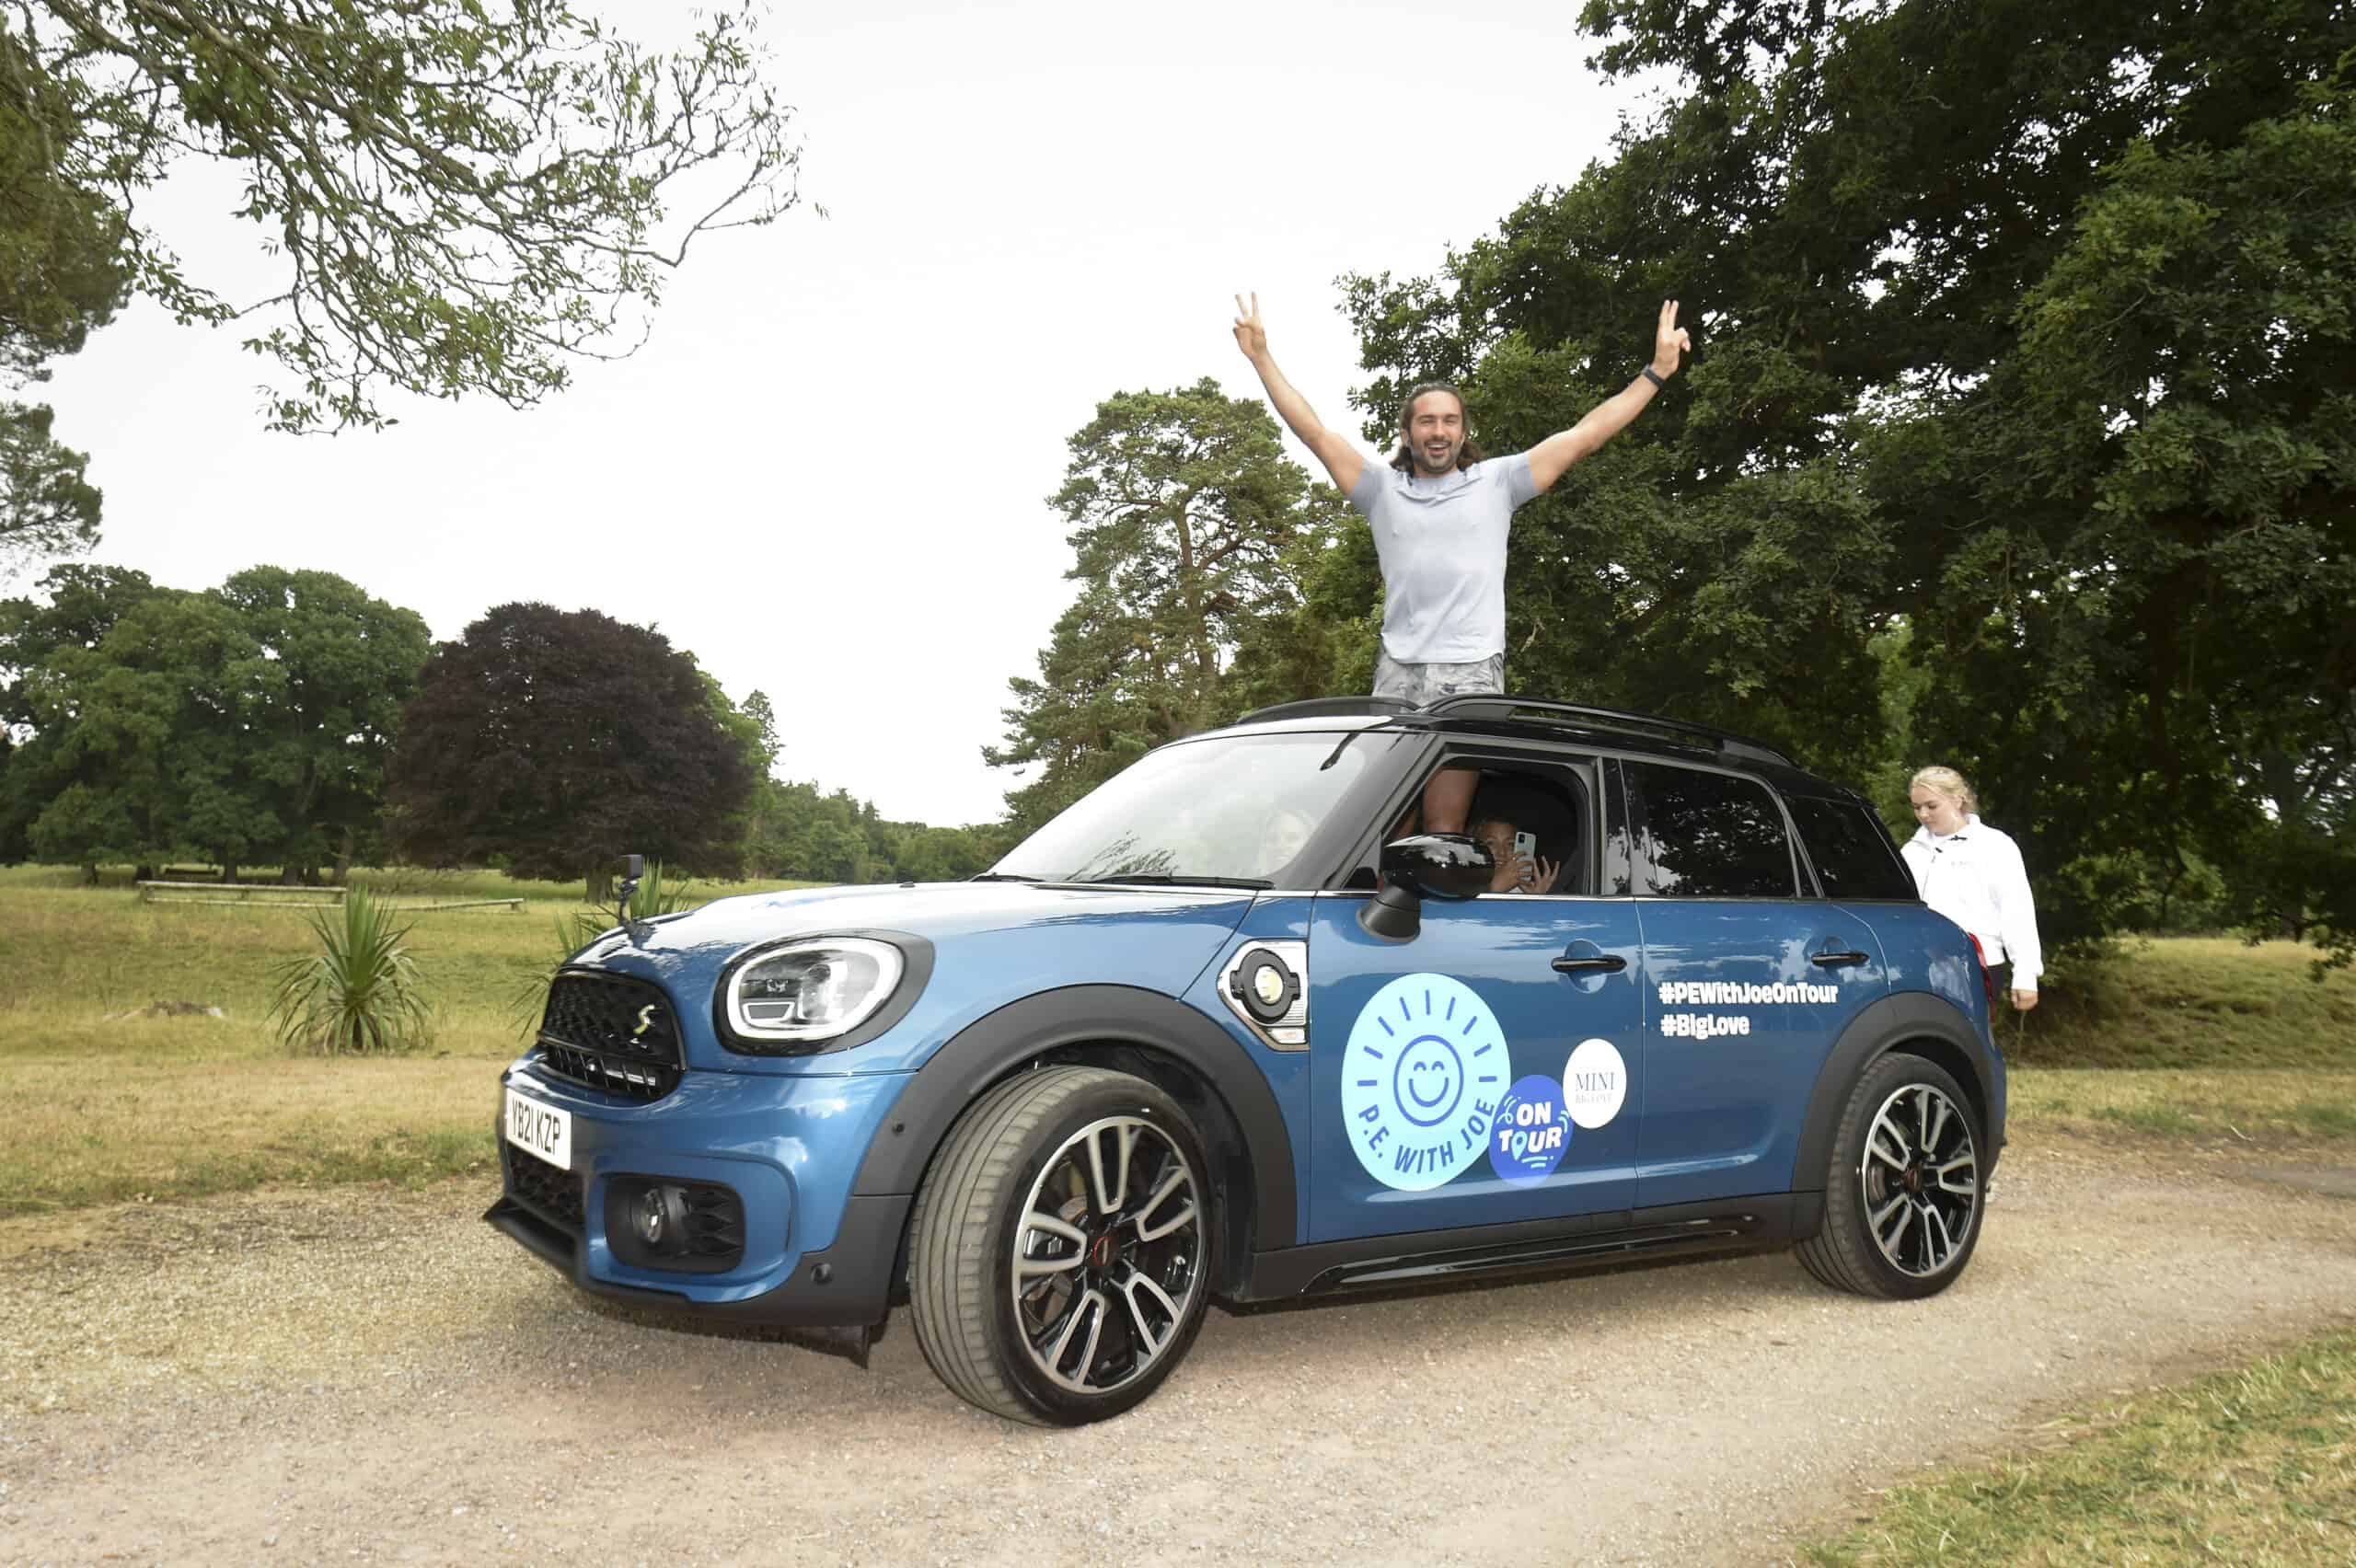 P.E With Joe Goes On The Road With MINI This Summer To Improve Wellbeing Through Exercise